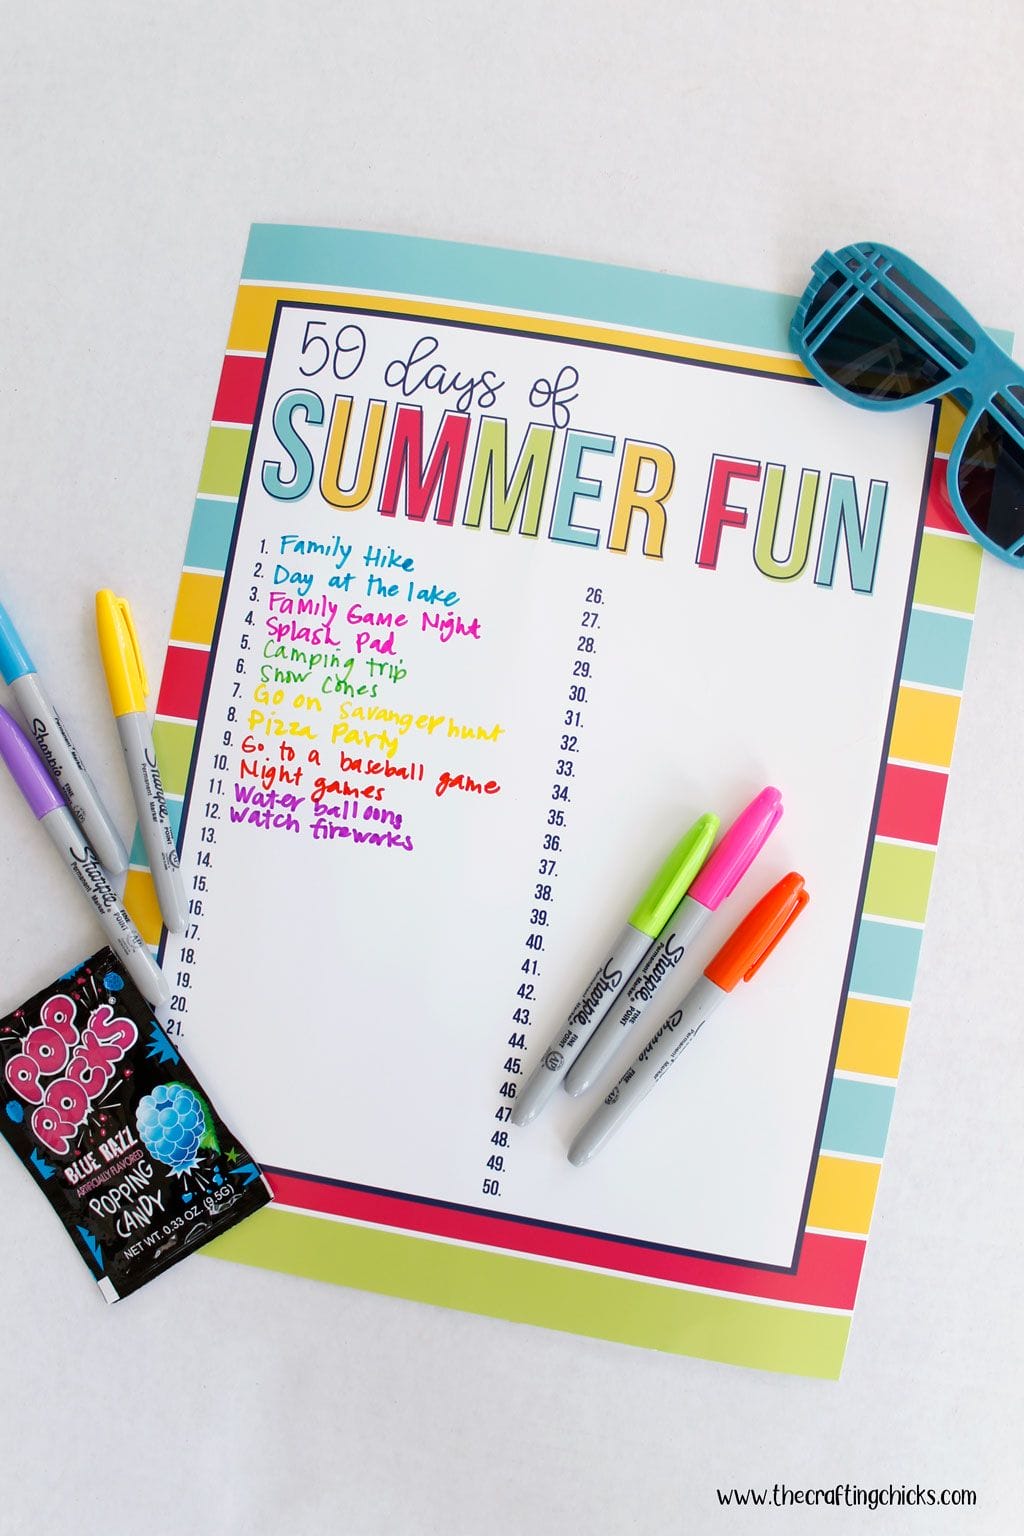 List started on the 50 Days of Summer Fun Chart